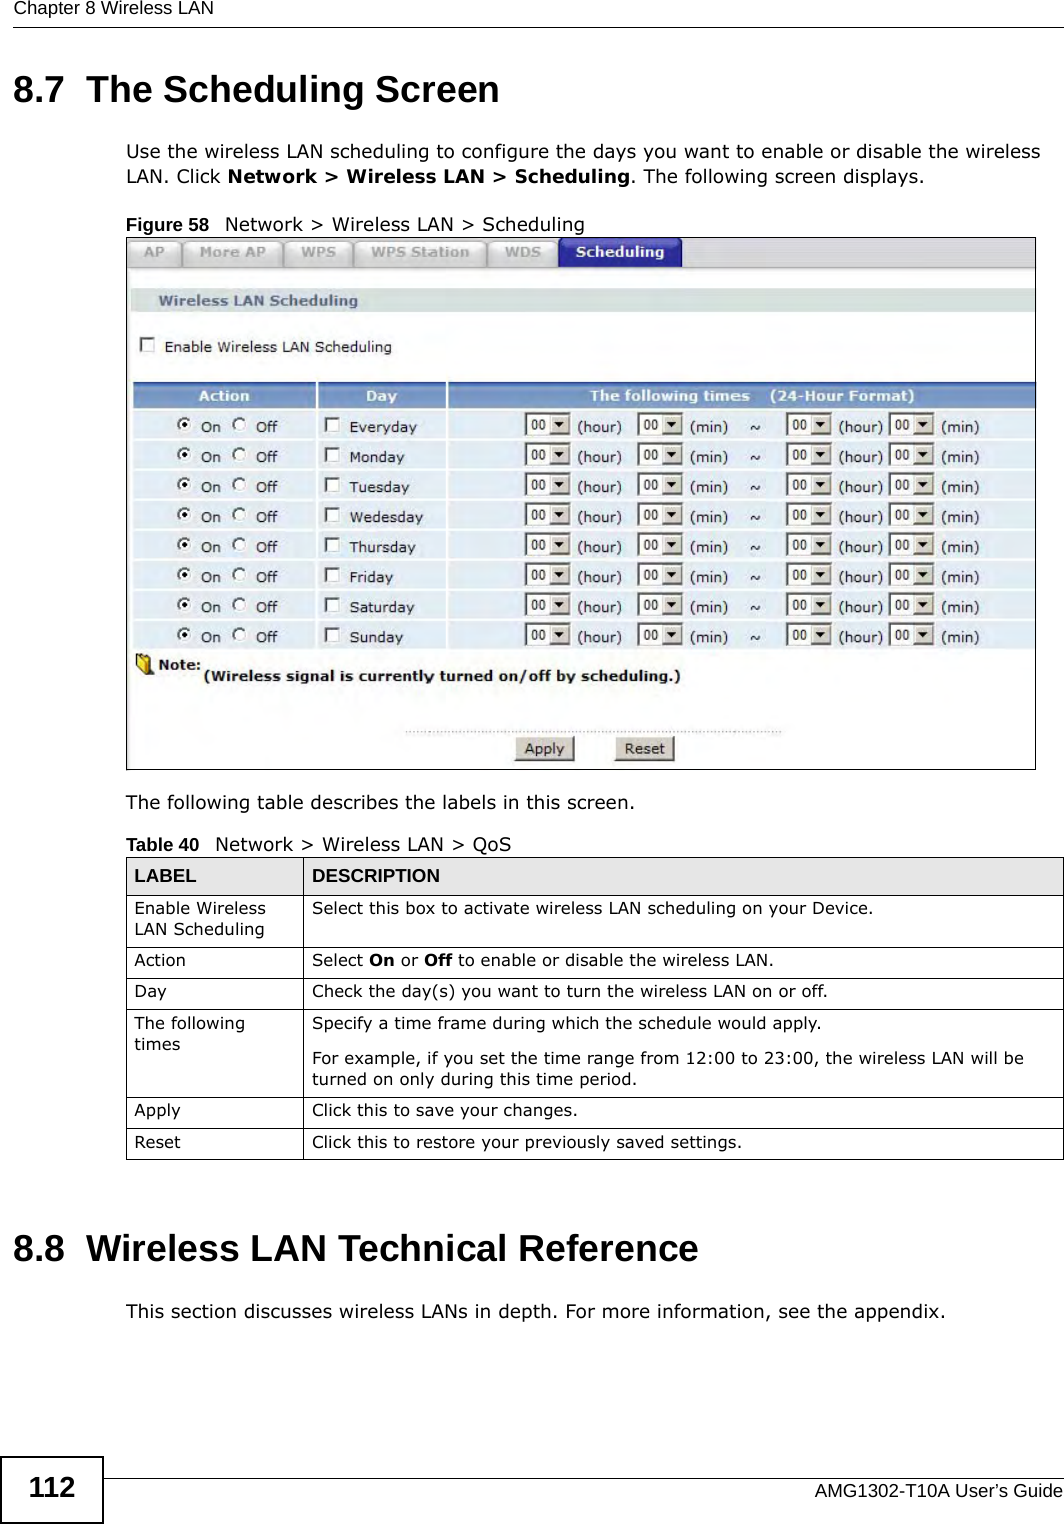 Chapter 8 Wireless LANAMG1302-T10A User’s Guide1128.7  The Scheduling ScreenUse the wireless LAN scheduling to configure the days you want to enable or disable the wireless LAN. Click Network &gt; Wireless LAN &gt; Scheduling. The following screen displays.Figure 58   Network &gt; Wireless LAN &gt; SchedulingThe following table describes the labels in this screen.8.8  Wireless LAN Technical ReferenceThis section discusses wireless LANs in depth. For more information, see the appendix.Table 40   Network &gt; Wireless LAN &gt; QoSLABEL DESCRIPTIONEnable Wireless LAN SchedulingSelect this box to activate wireless LAN scheduling on your Device.Action Select On or Off to enable or disable the wireless LAN.Day Check the day(s) you want to turn the wireless LAN on or off.The following timesSpecify a time frame during which the schedule would apply.For example, if you set the time range from 12:00 to 23:00, the wireless LAN will be turned on only during this time period.Apply Click this to save your changes.Reset Click this to restore your previously saved settings.